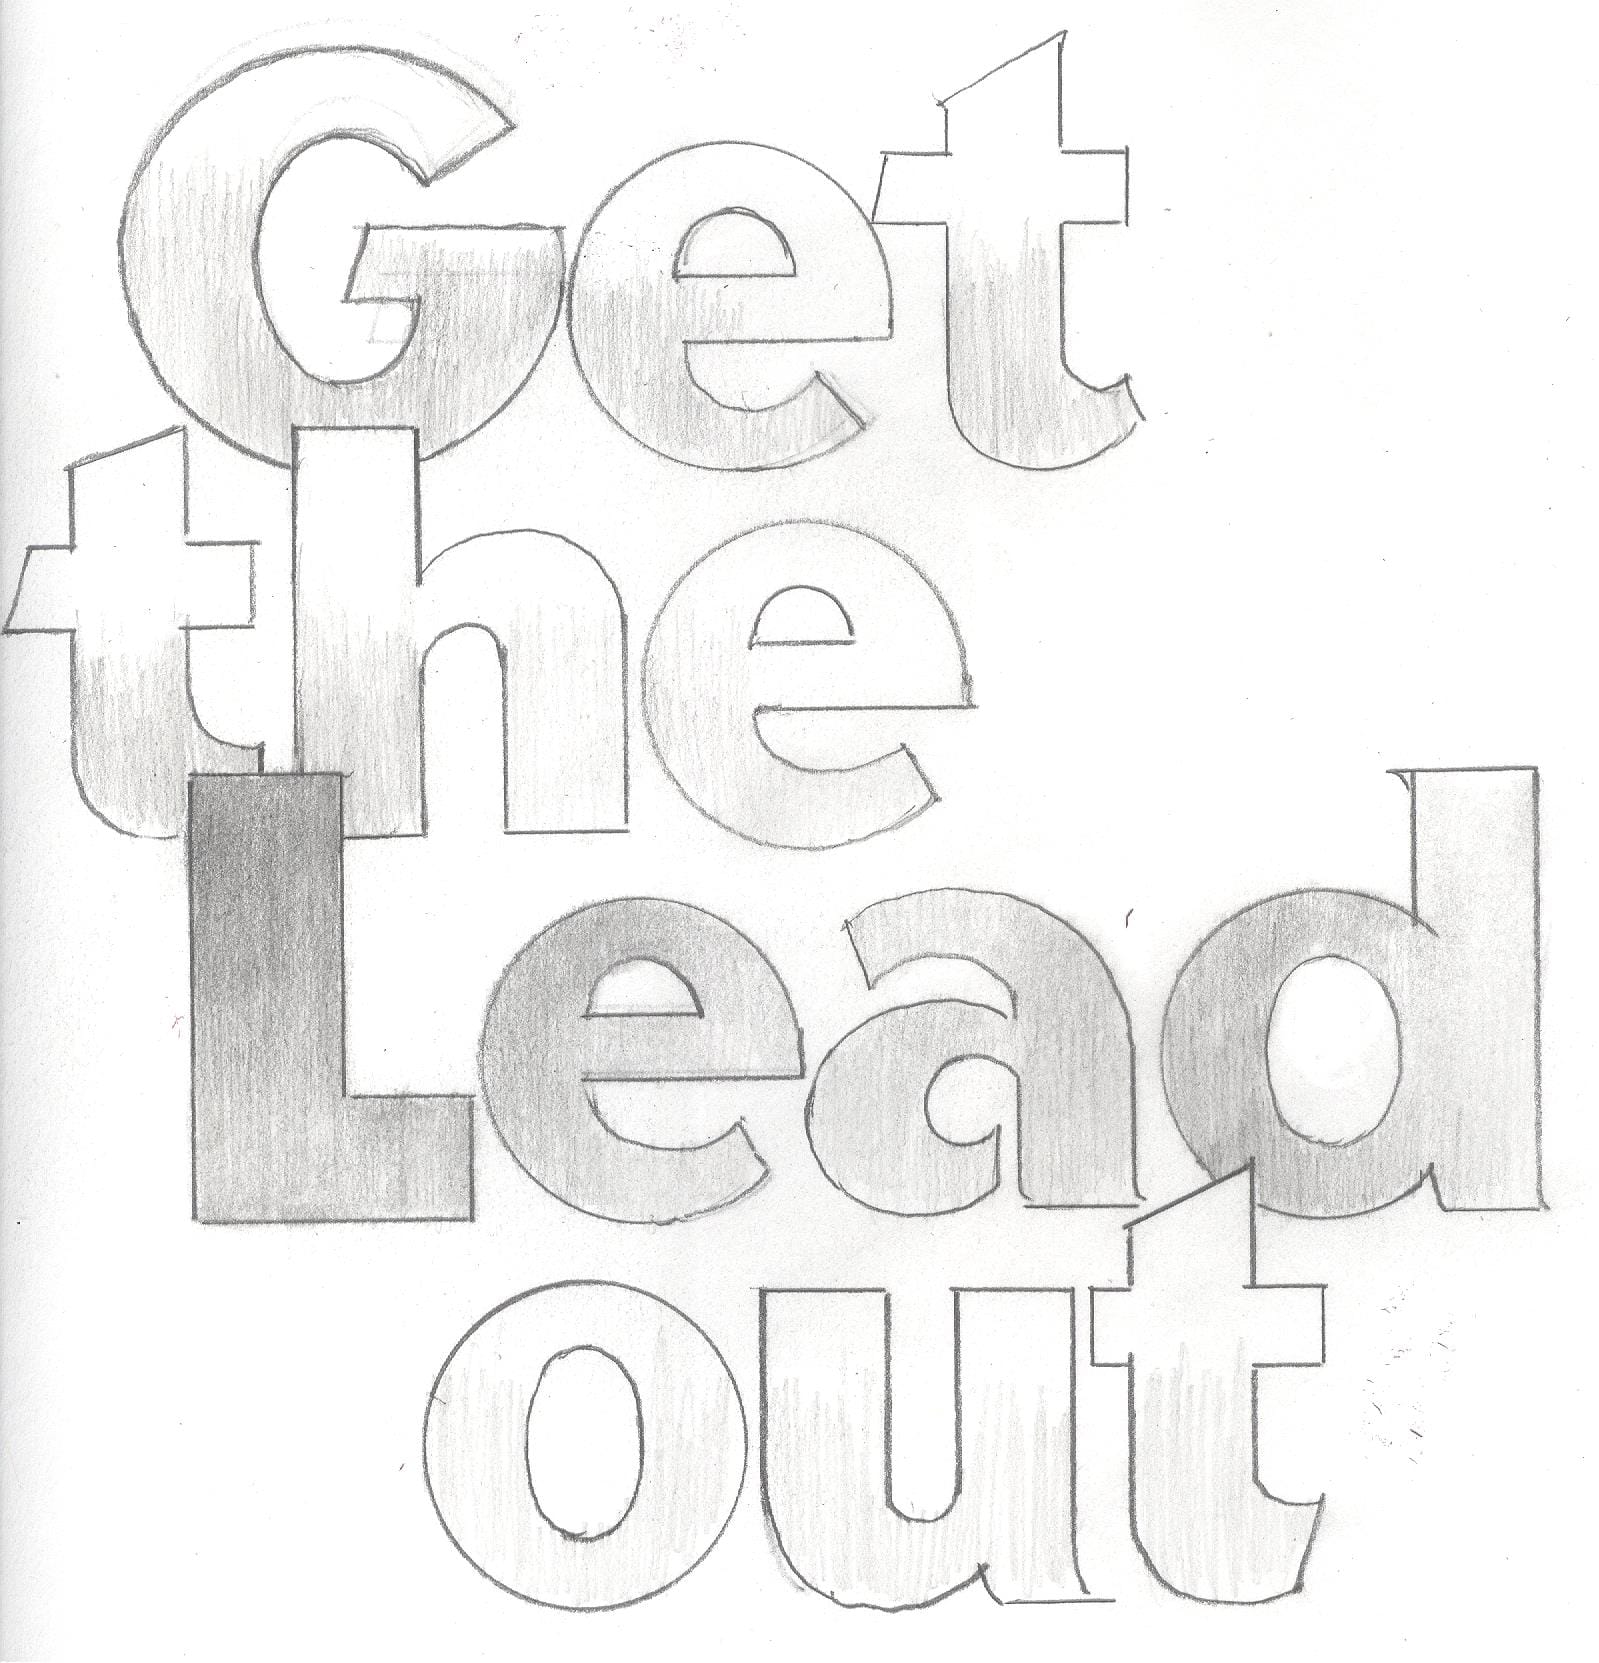 Pencil sketch lettering with slight emphasis given to the word 'lead' through rendering.